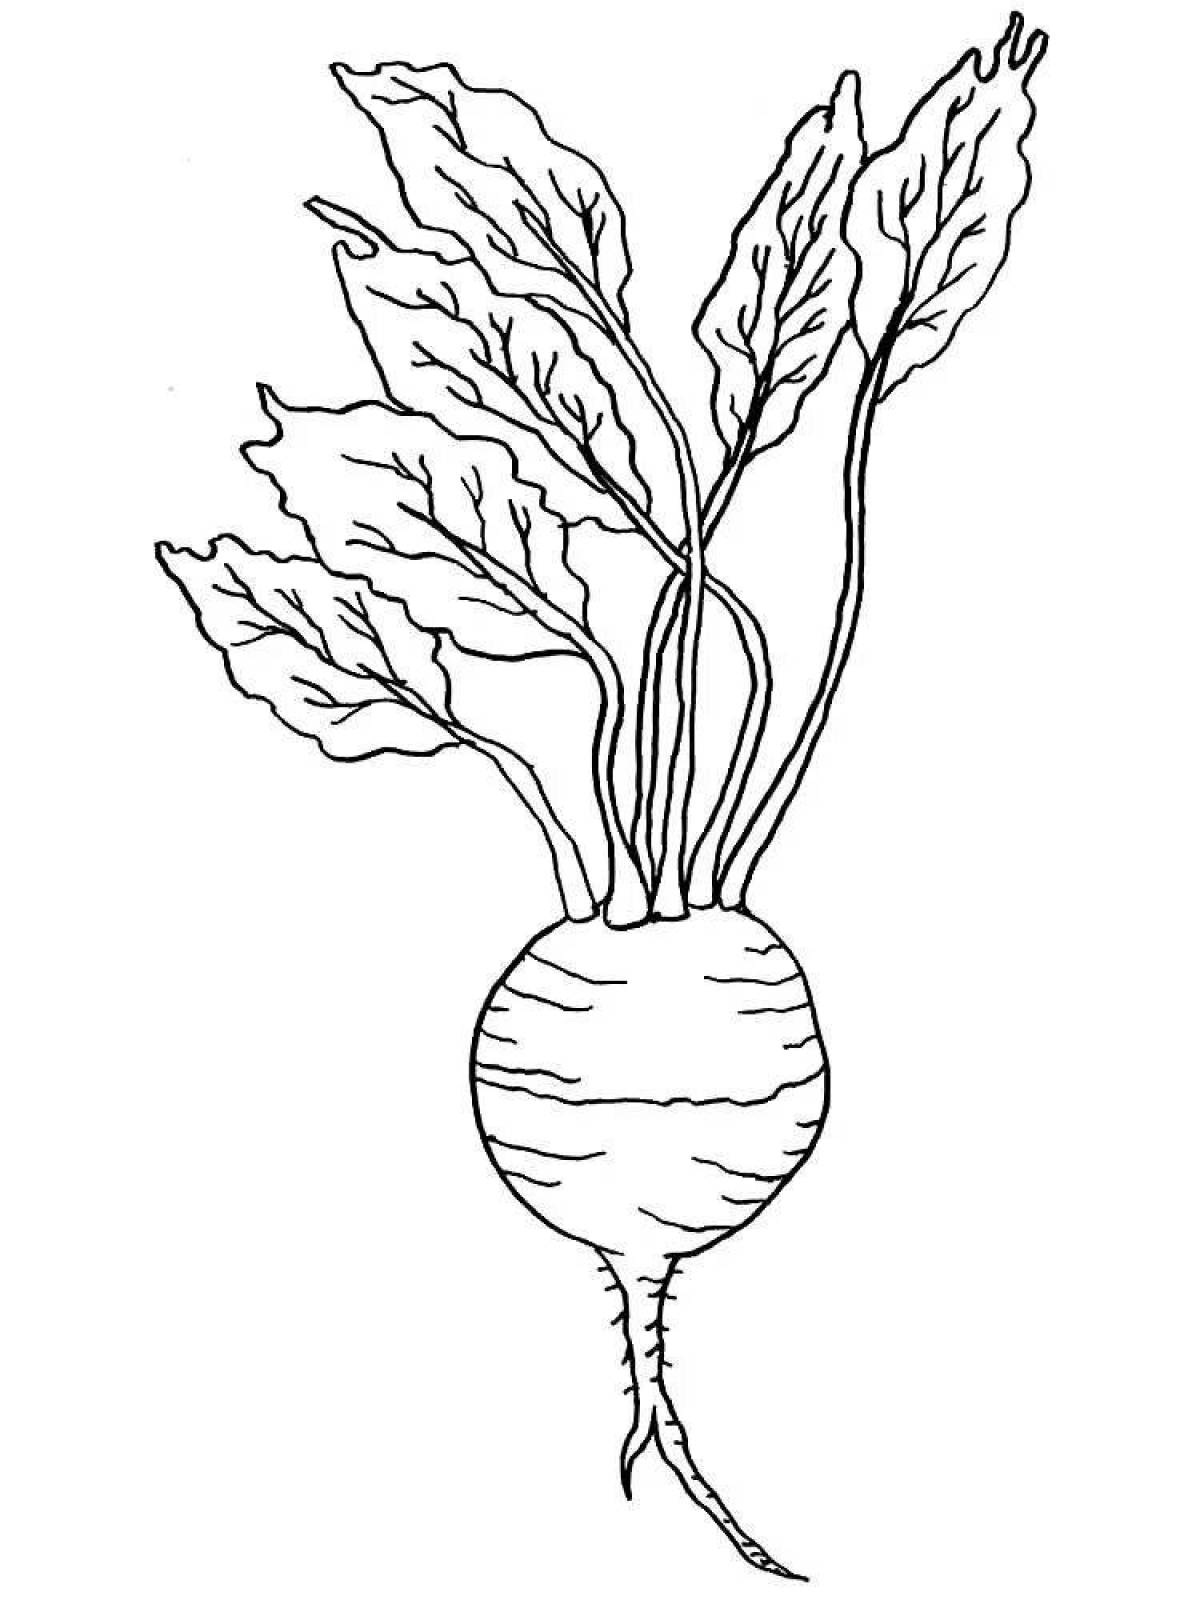 Outstanding beetroot coloring page for kids